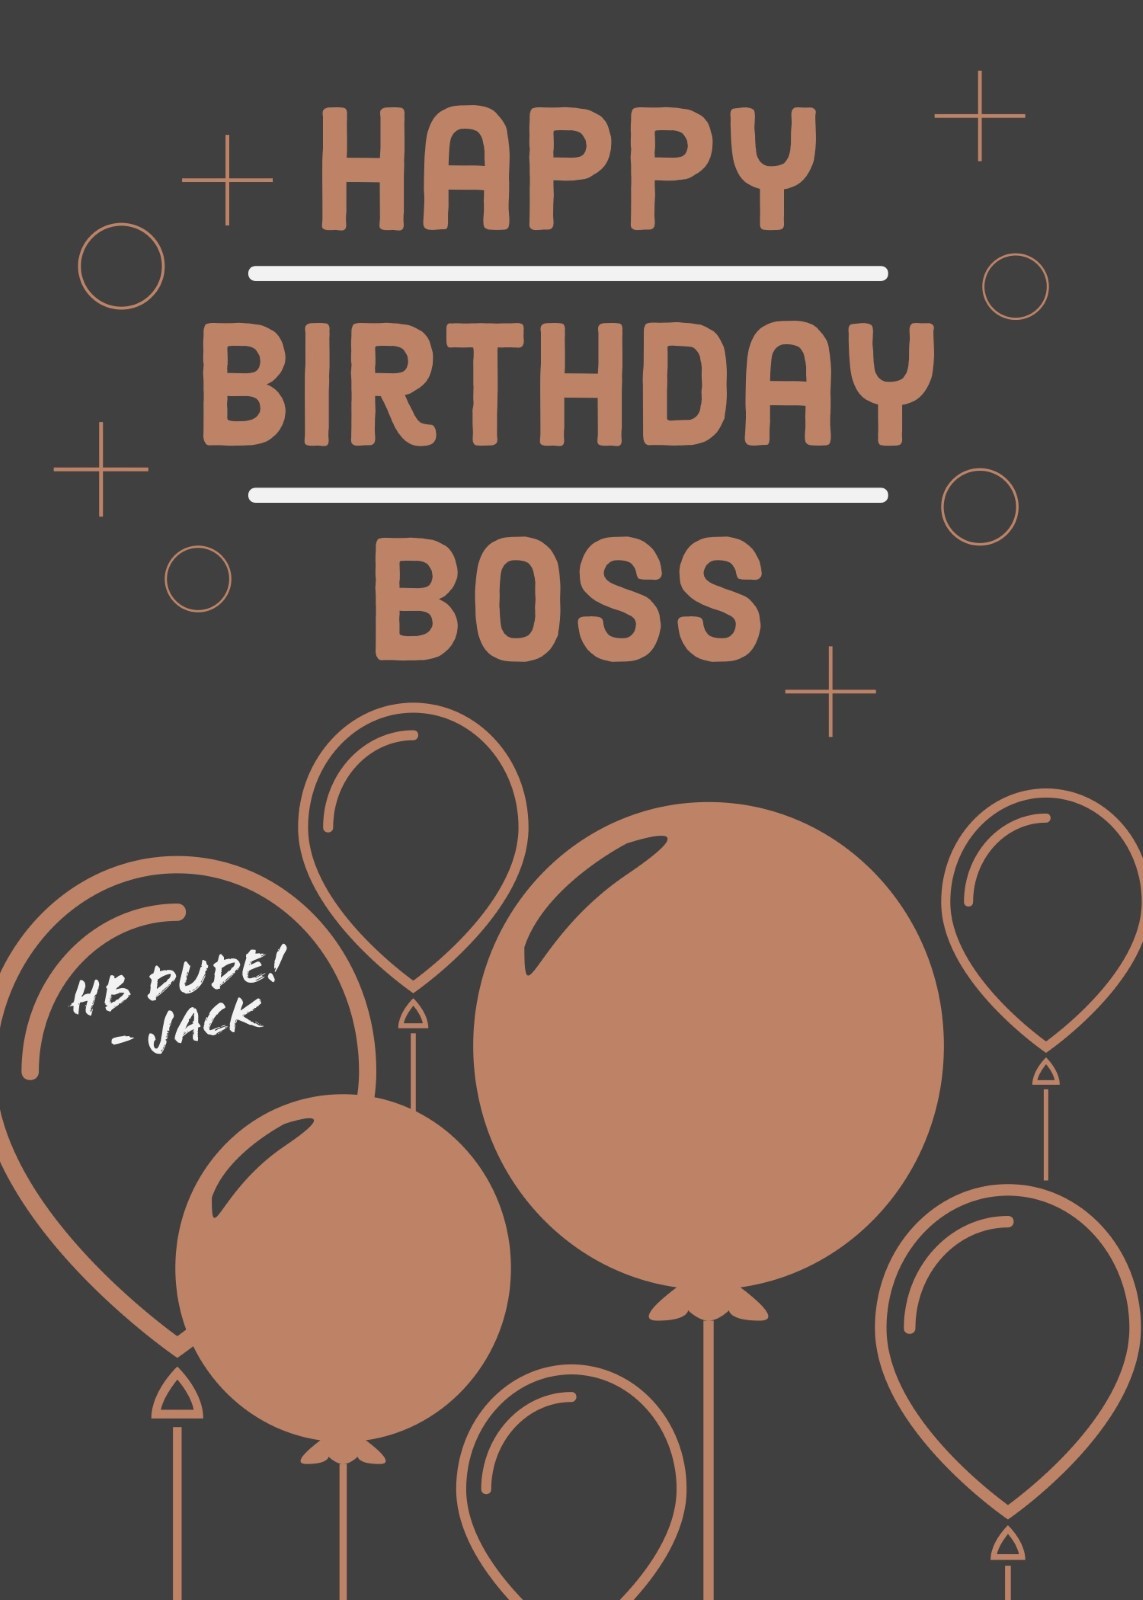 Free Birthday Card Maker with Online Templates